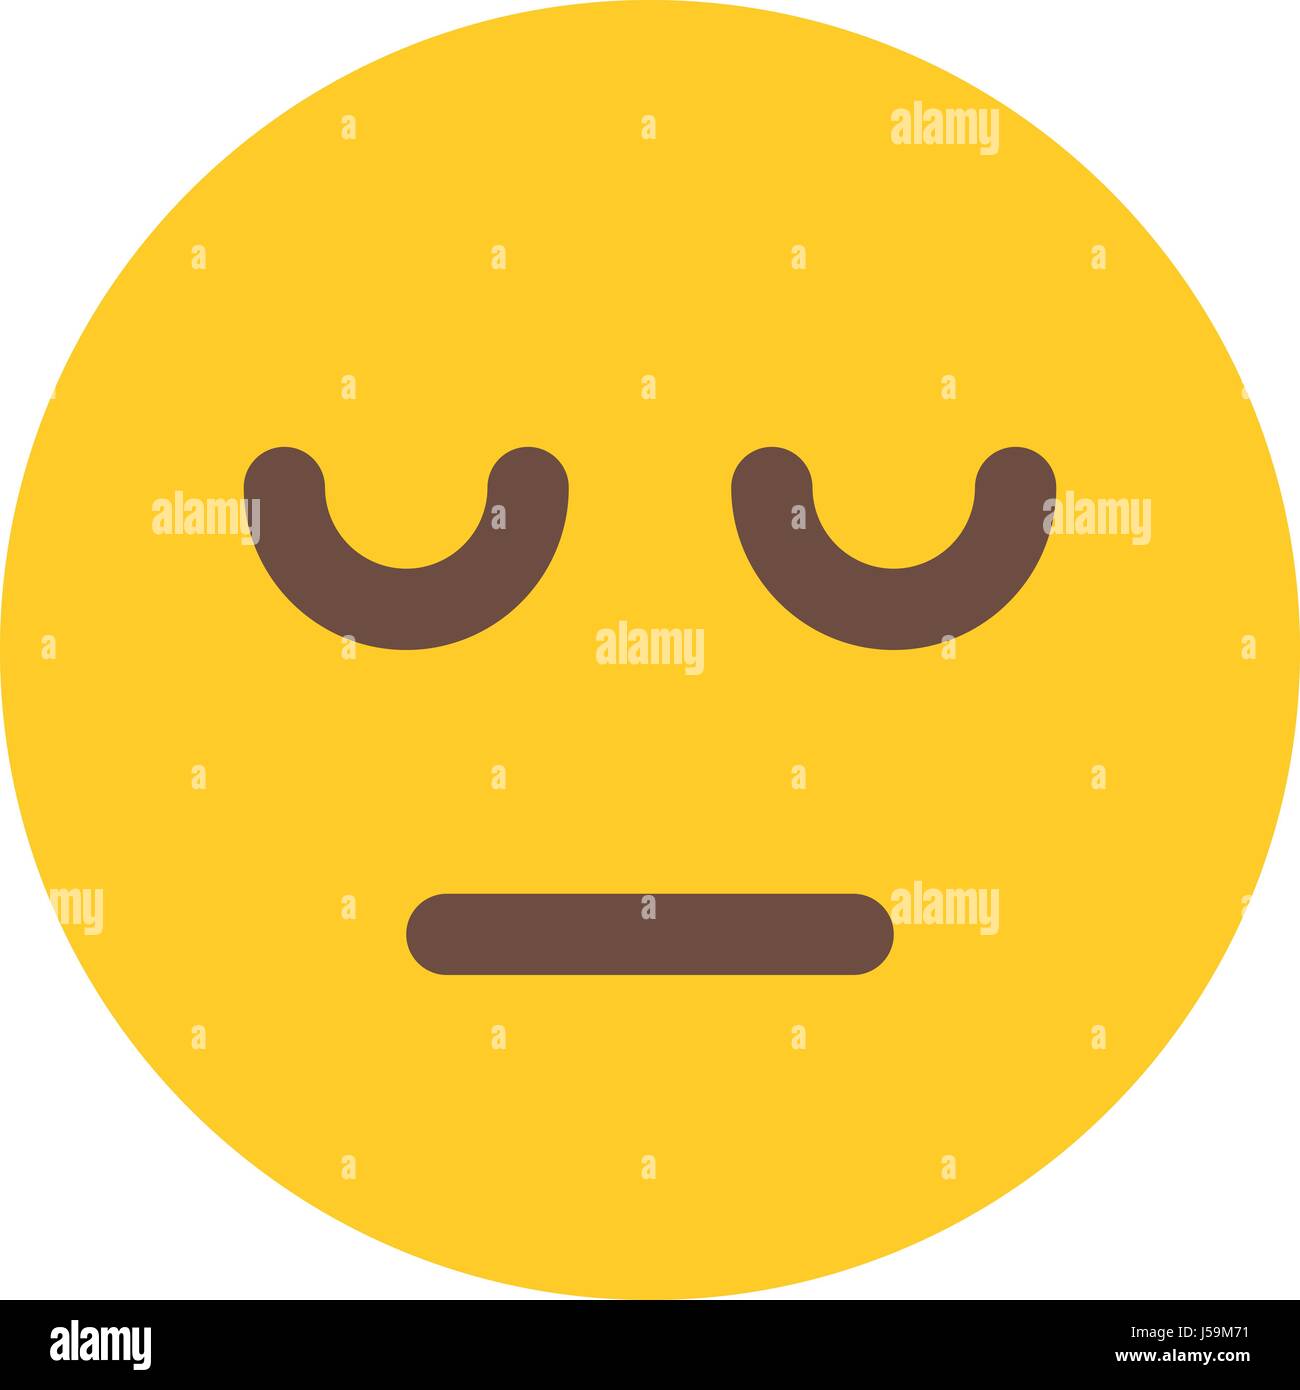 Tired Face With Lolling Tongue Icon Stock Illustration - Download Image Now  - Coronavirus, Emoticon, Emotion - iStock